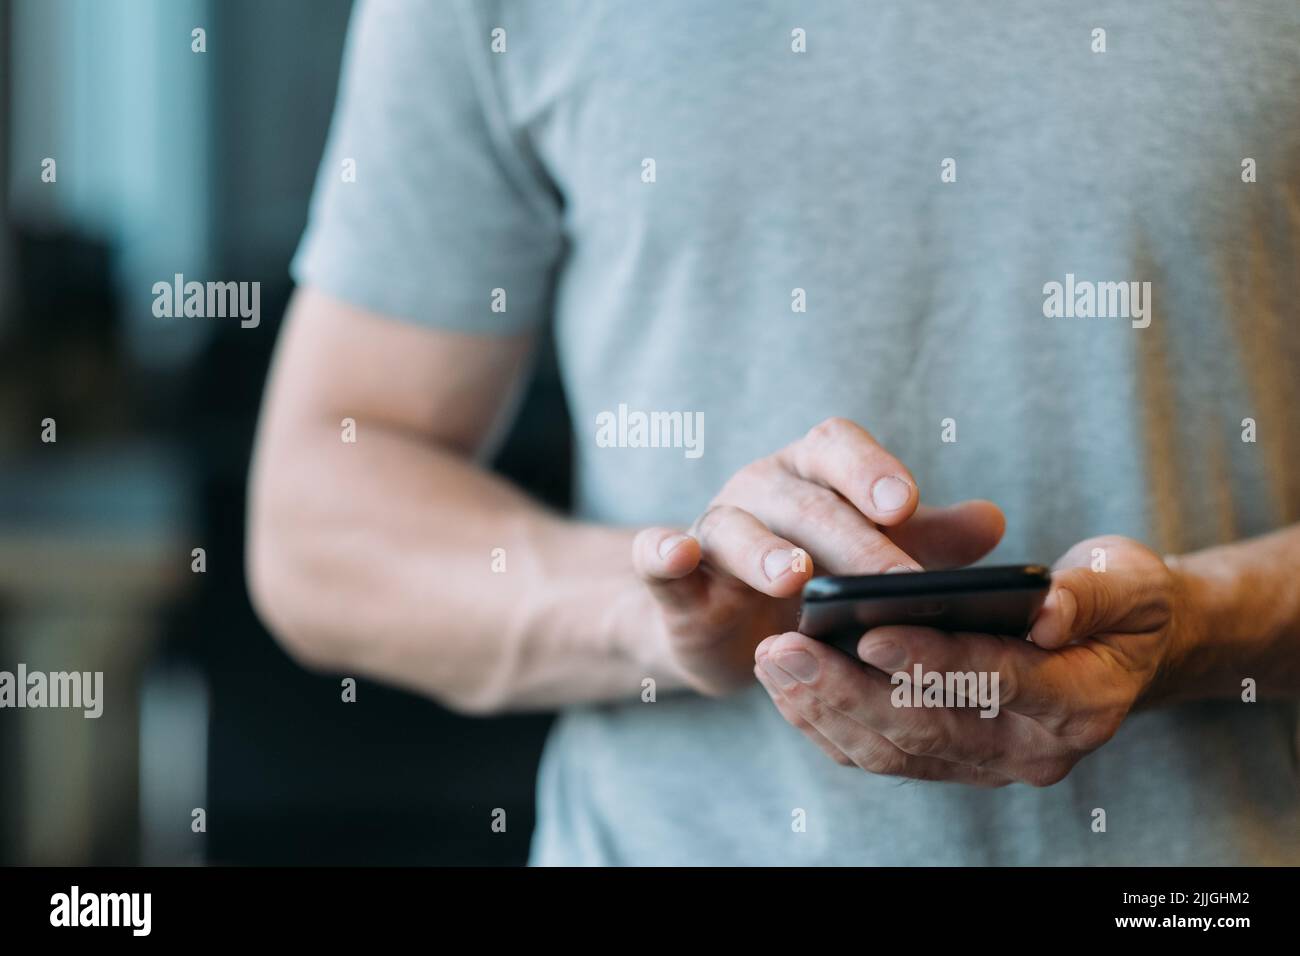 social media networking business man smartphone Stock Photo